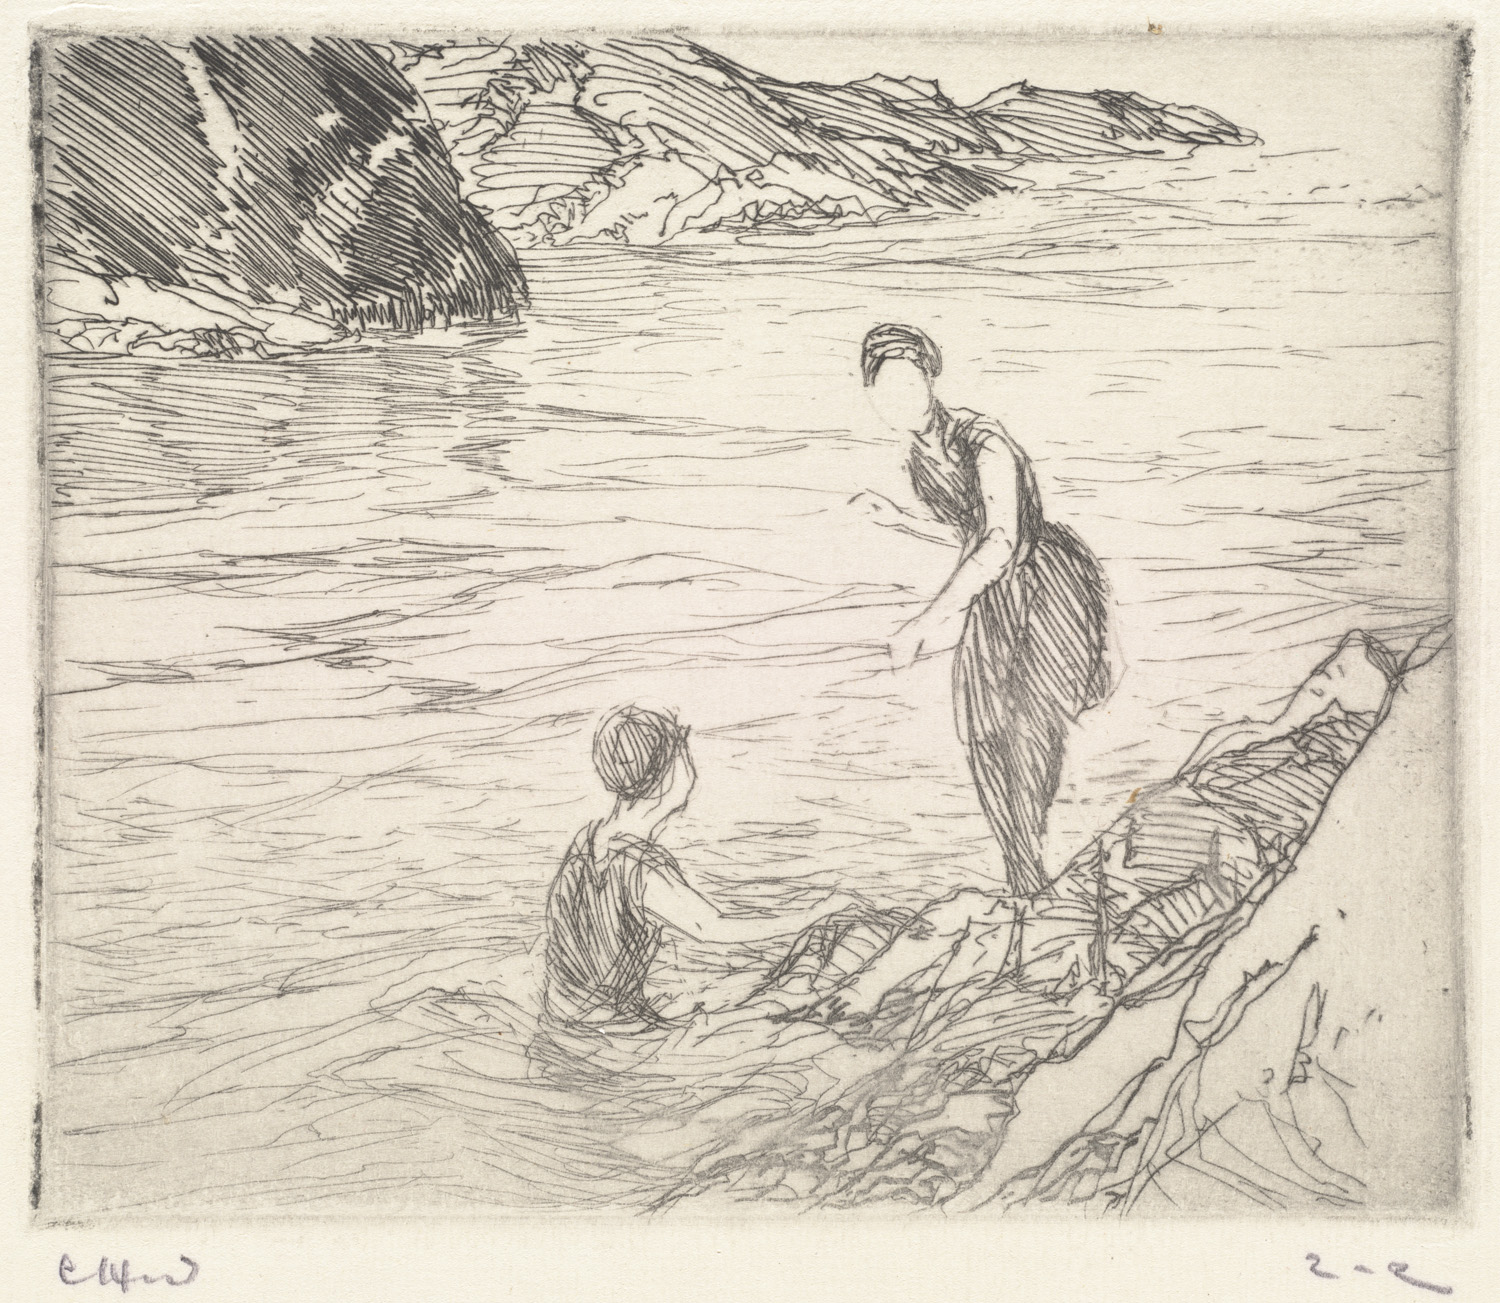 a sketch of a man and a child sitting in the water